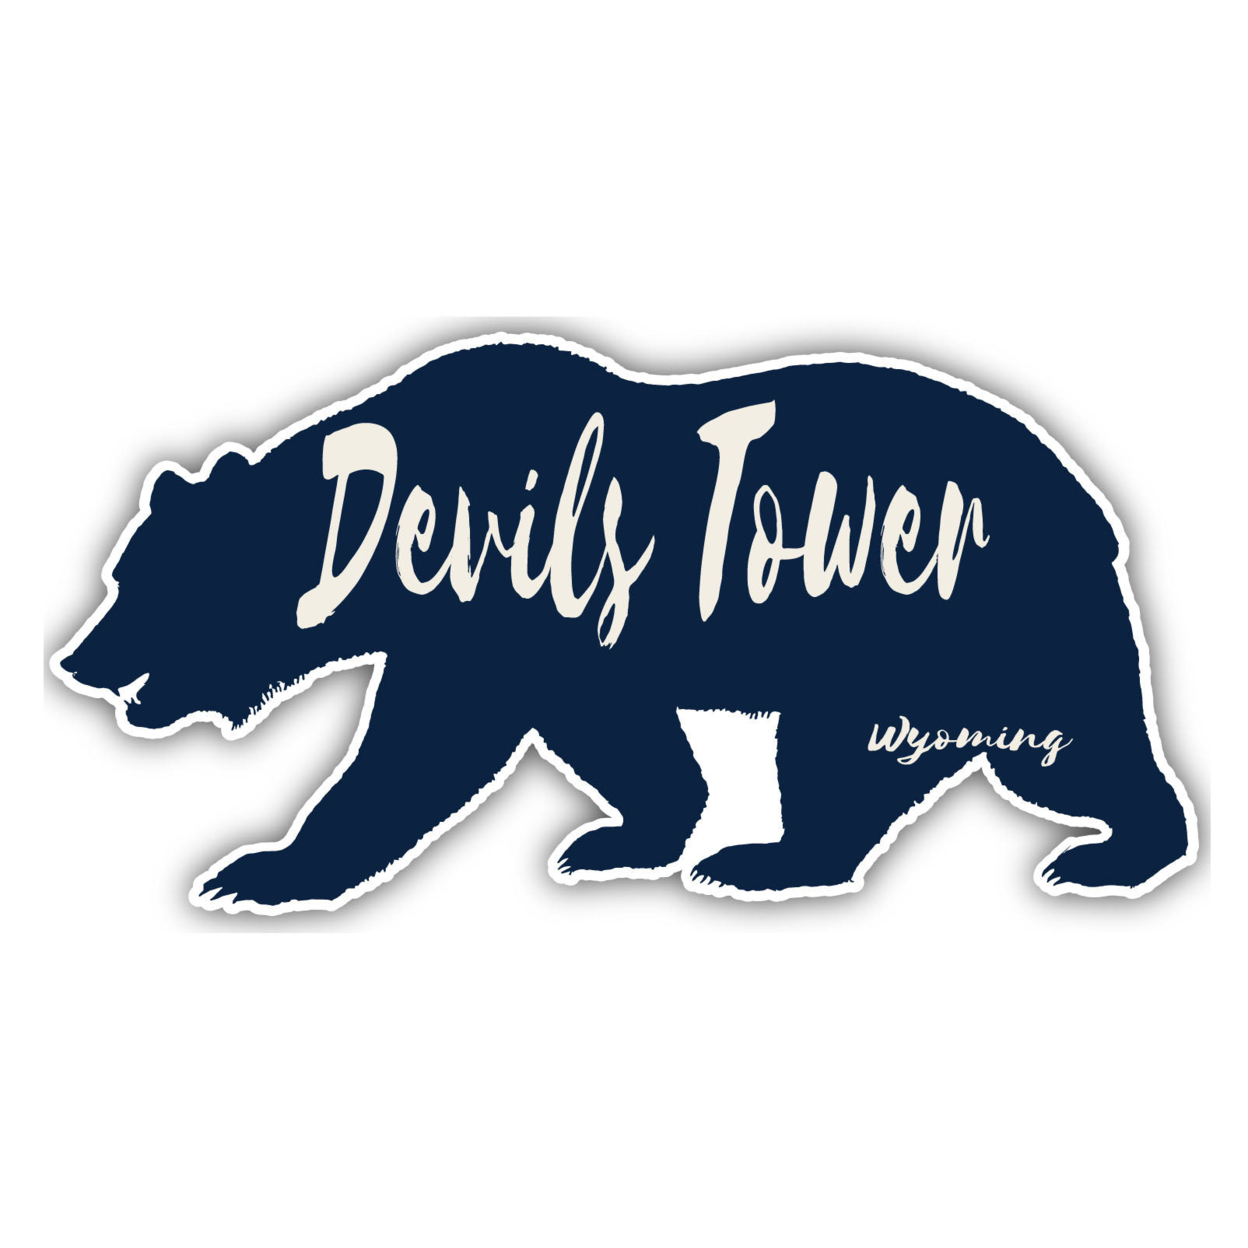 Devils Tower Wyoming Souvenir Decorative Stickers (Choose Theme And Size) - Single Unit, 6-Inch, Adventures Awaits